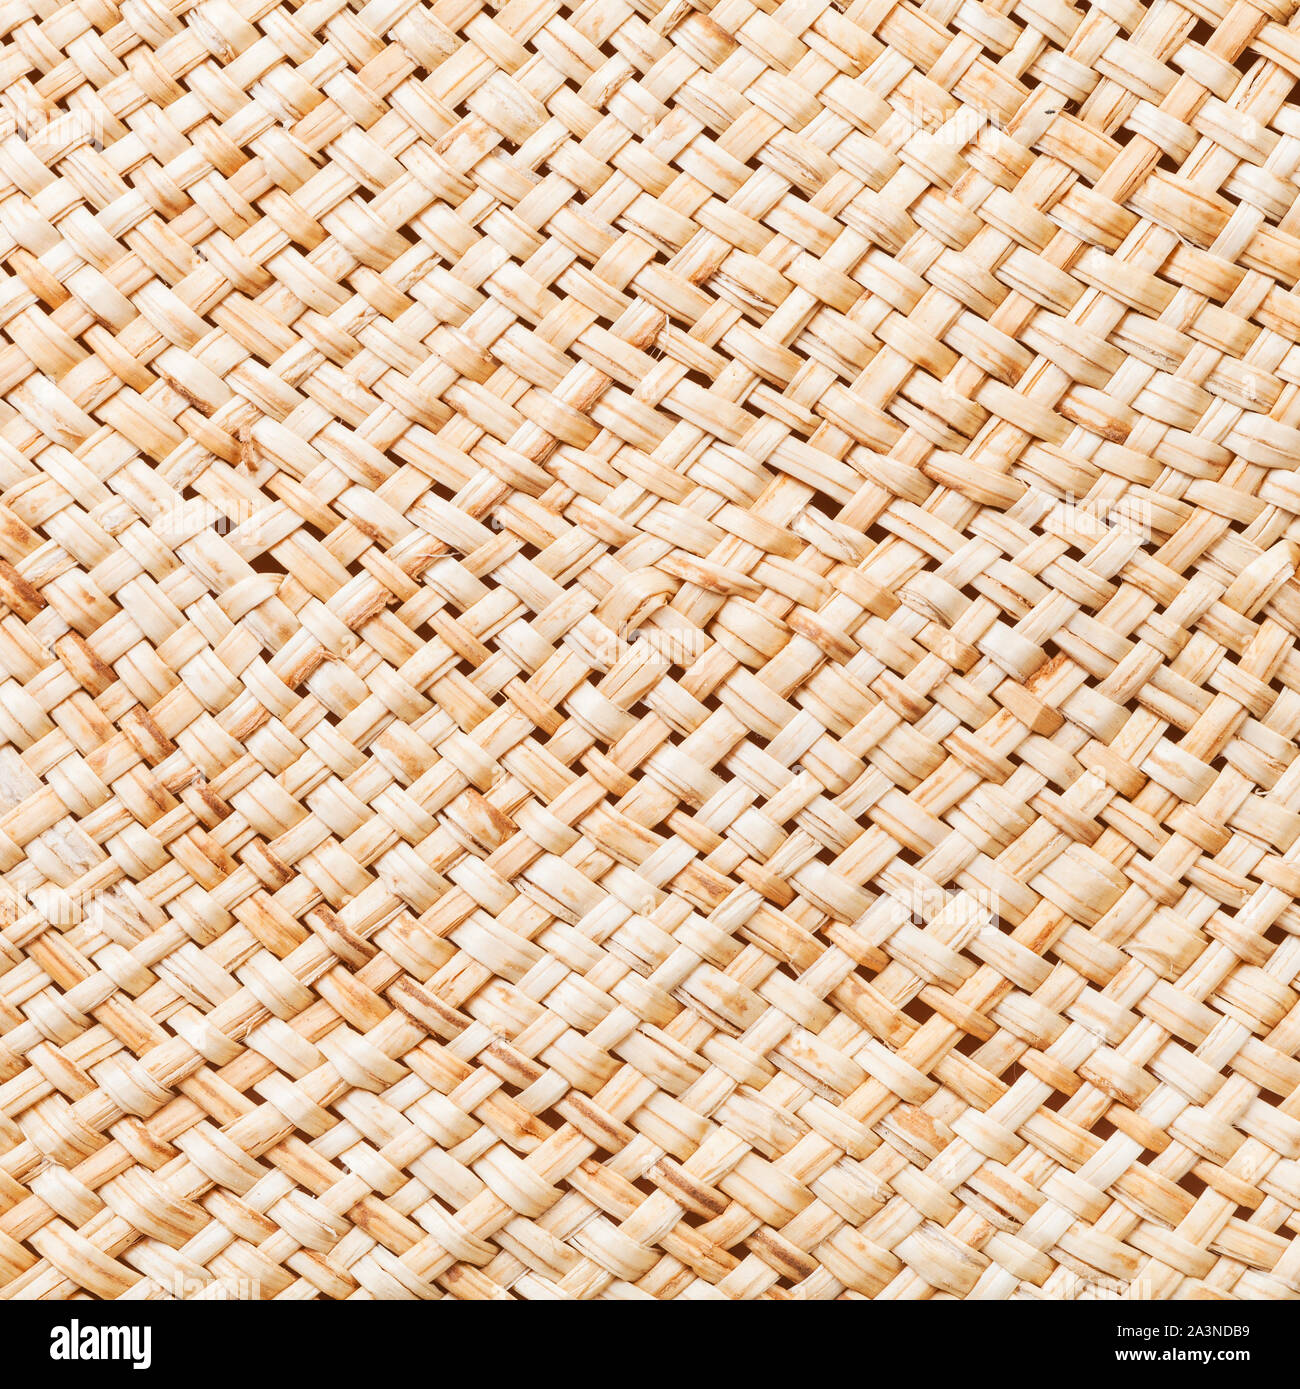 textile square background - texture of summer straw hat from interwoven raffia fibers close up Stock Photo